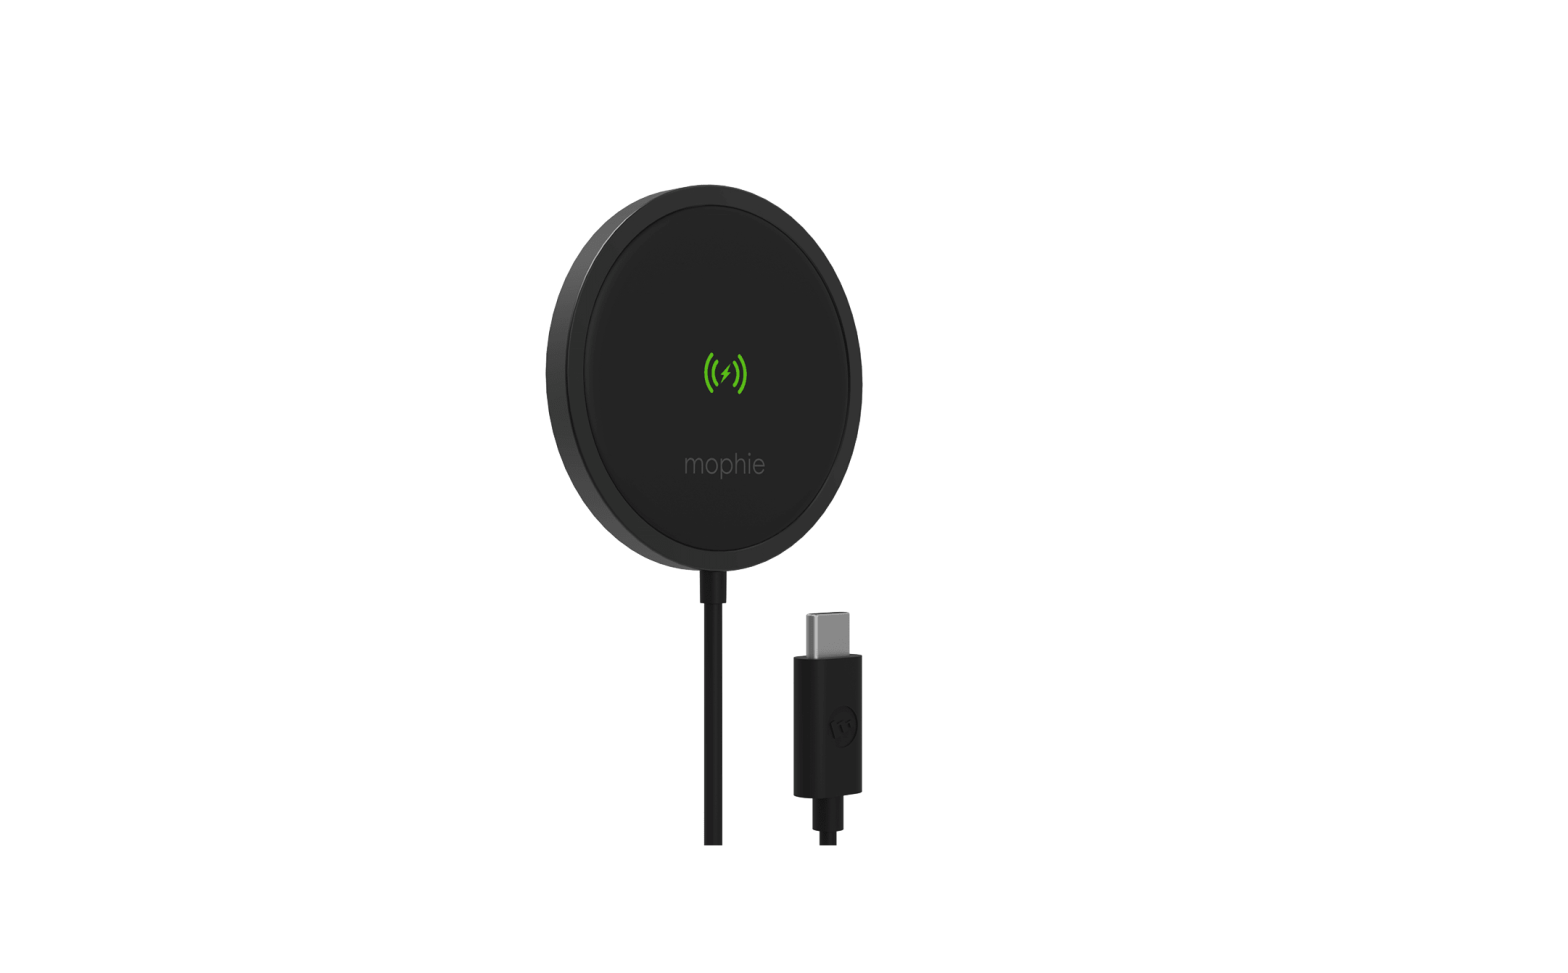 mophie snap+ Wireless Charger Instructions